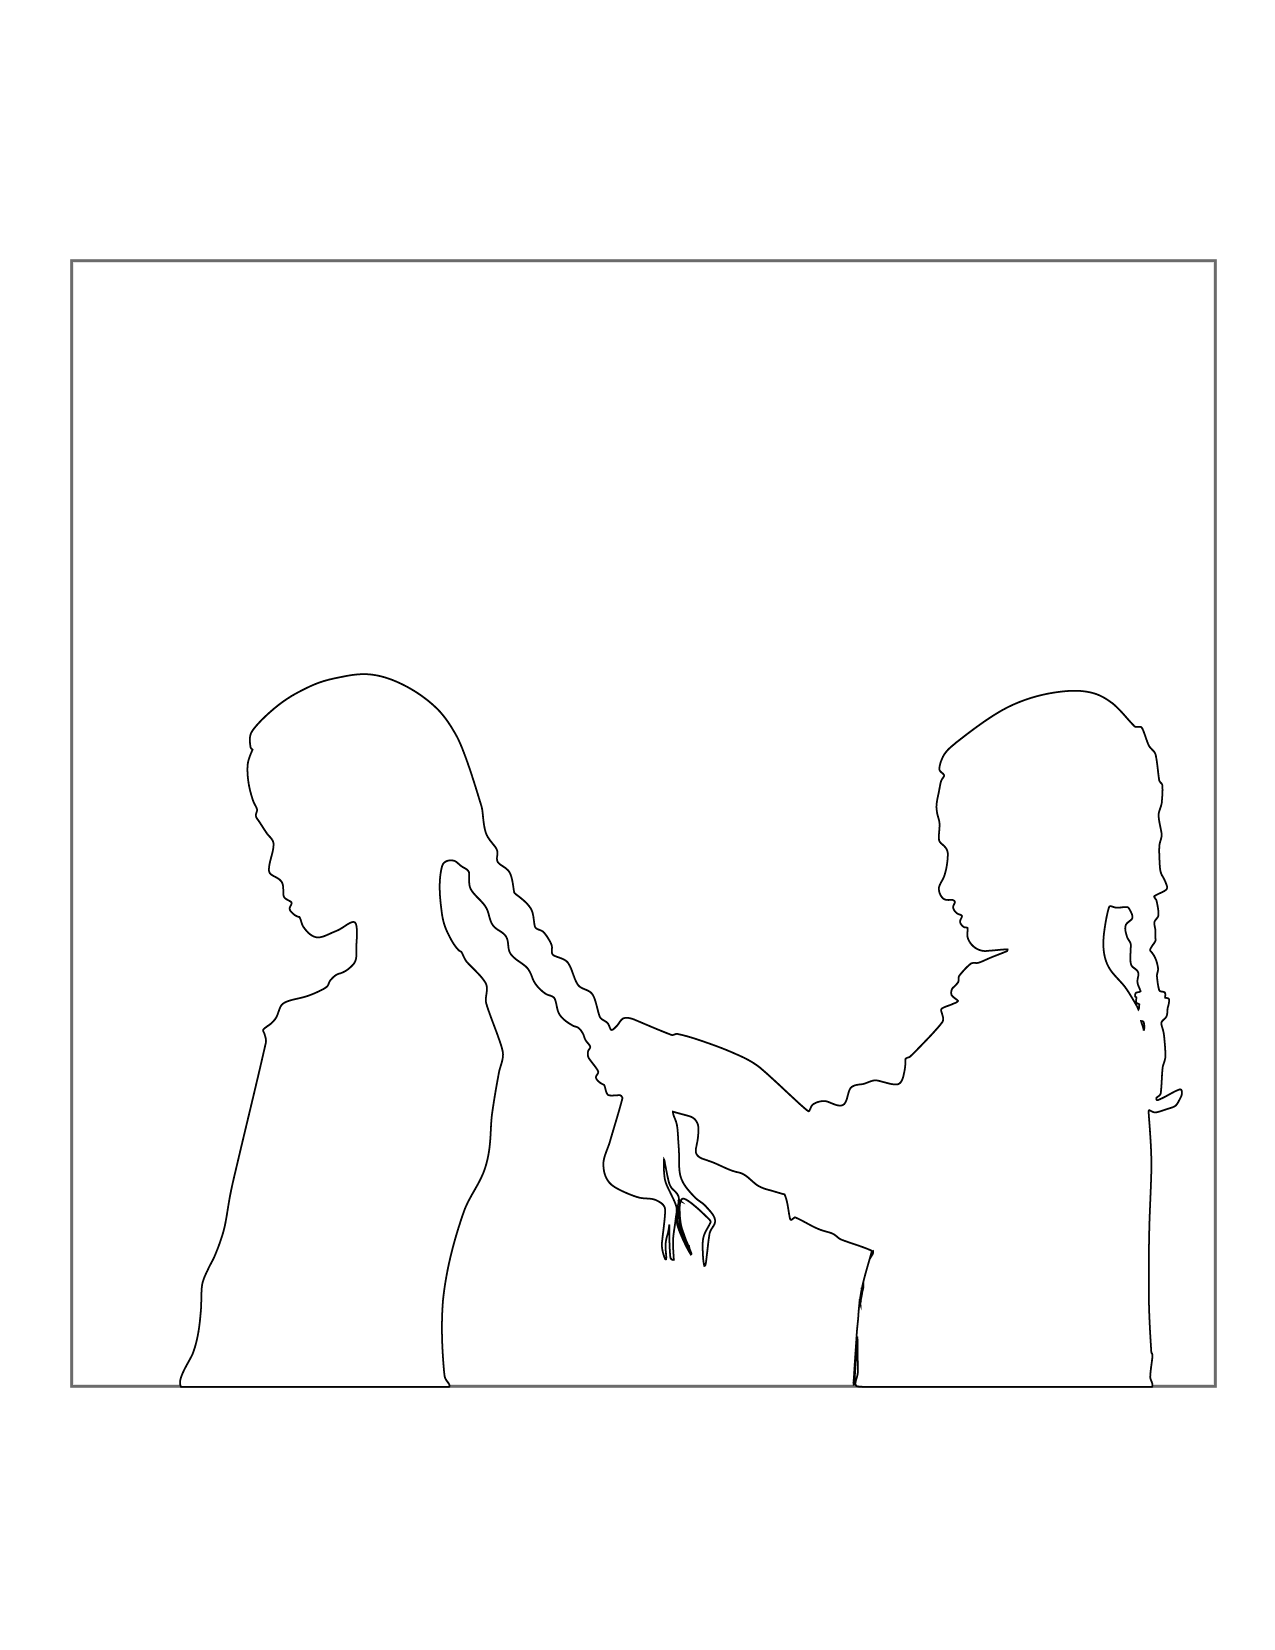 Friends Braiding Hair Coloring Page